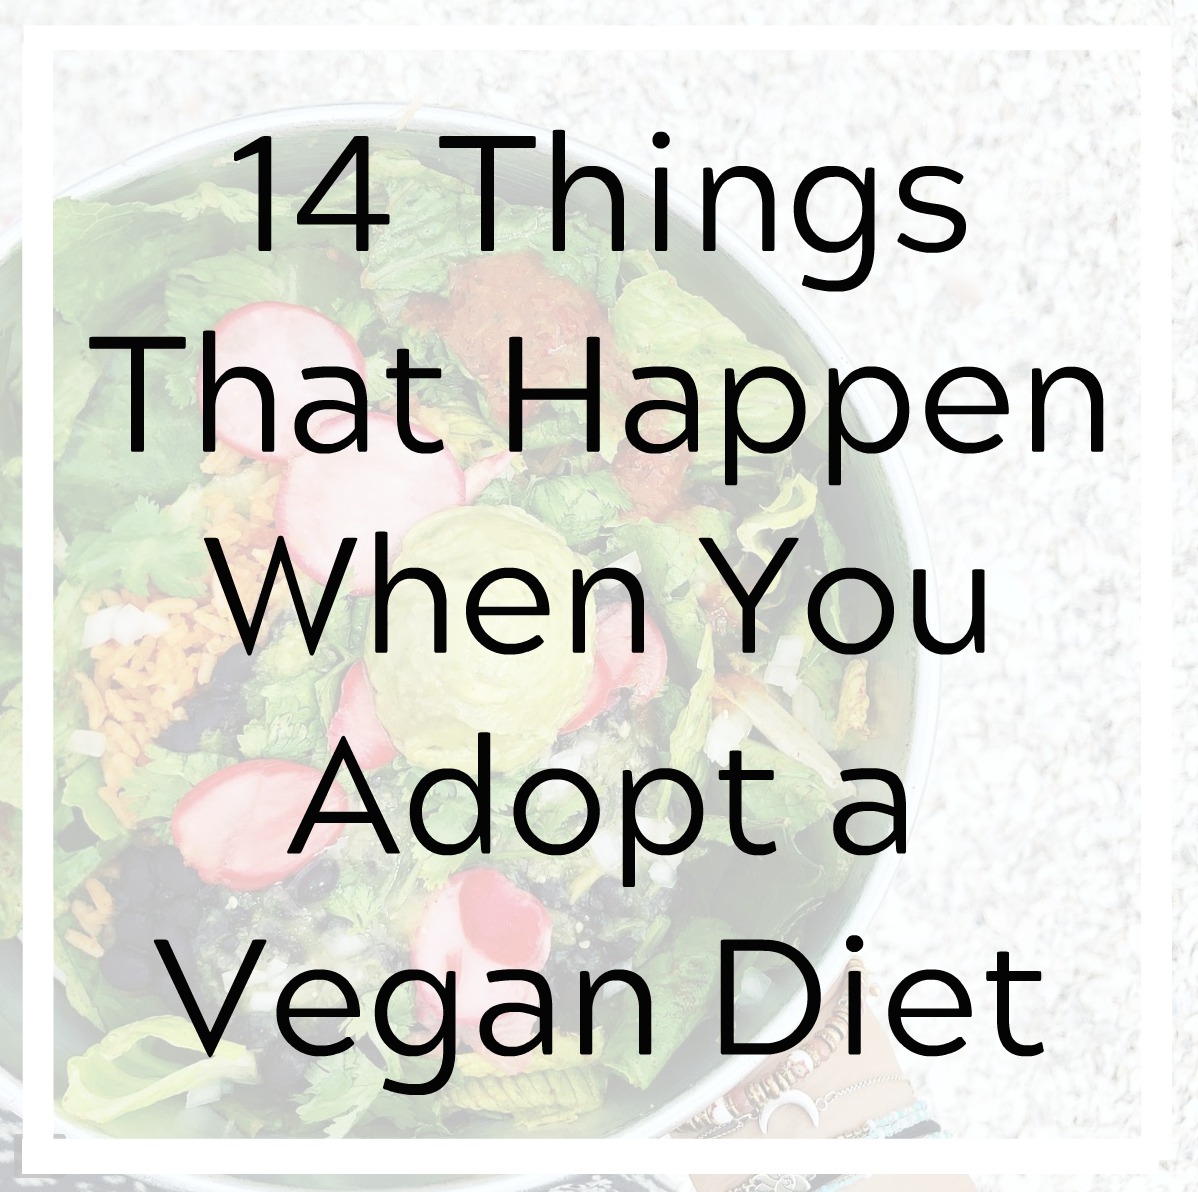 14 Things That Happen When You Adopt a Vegan Diet